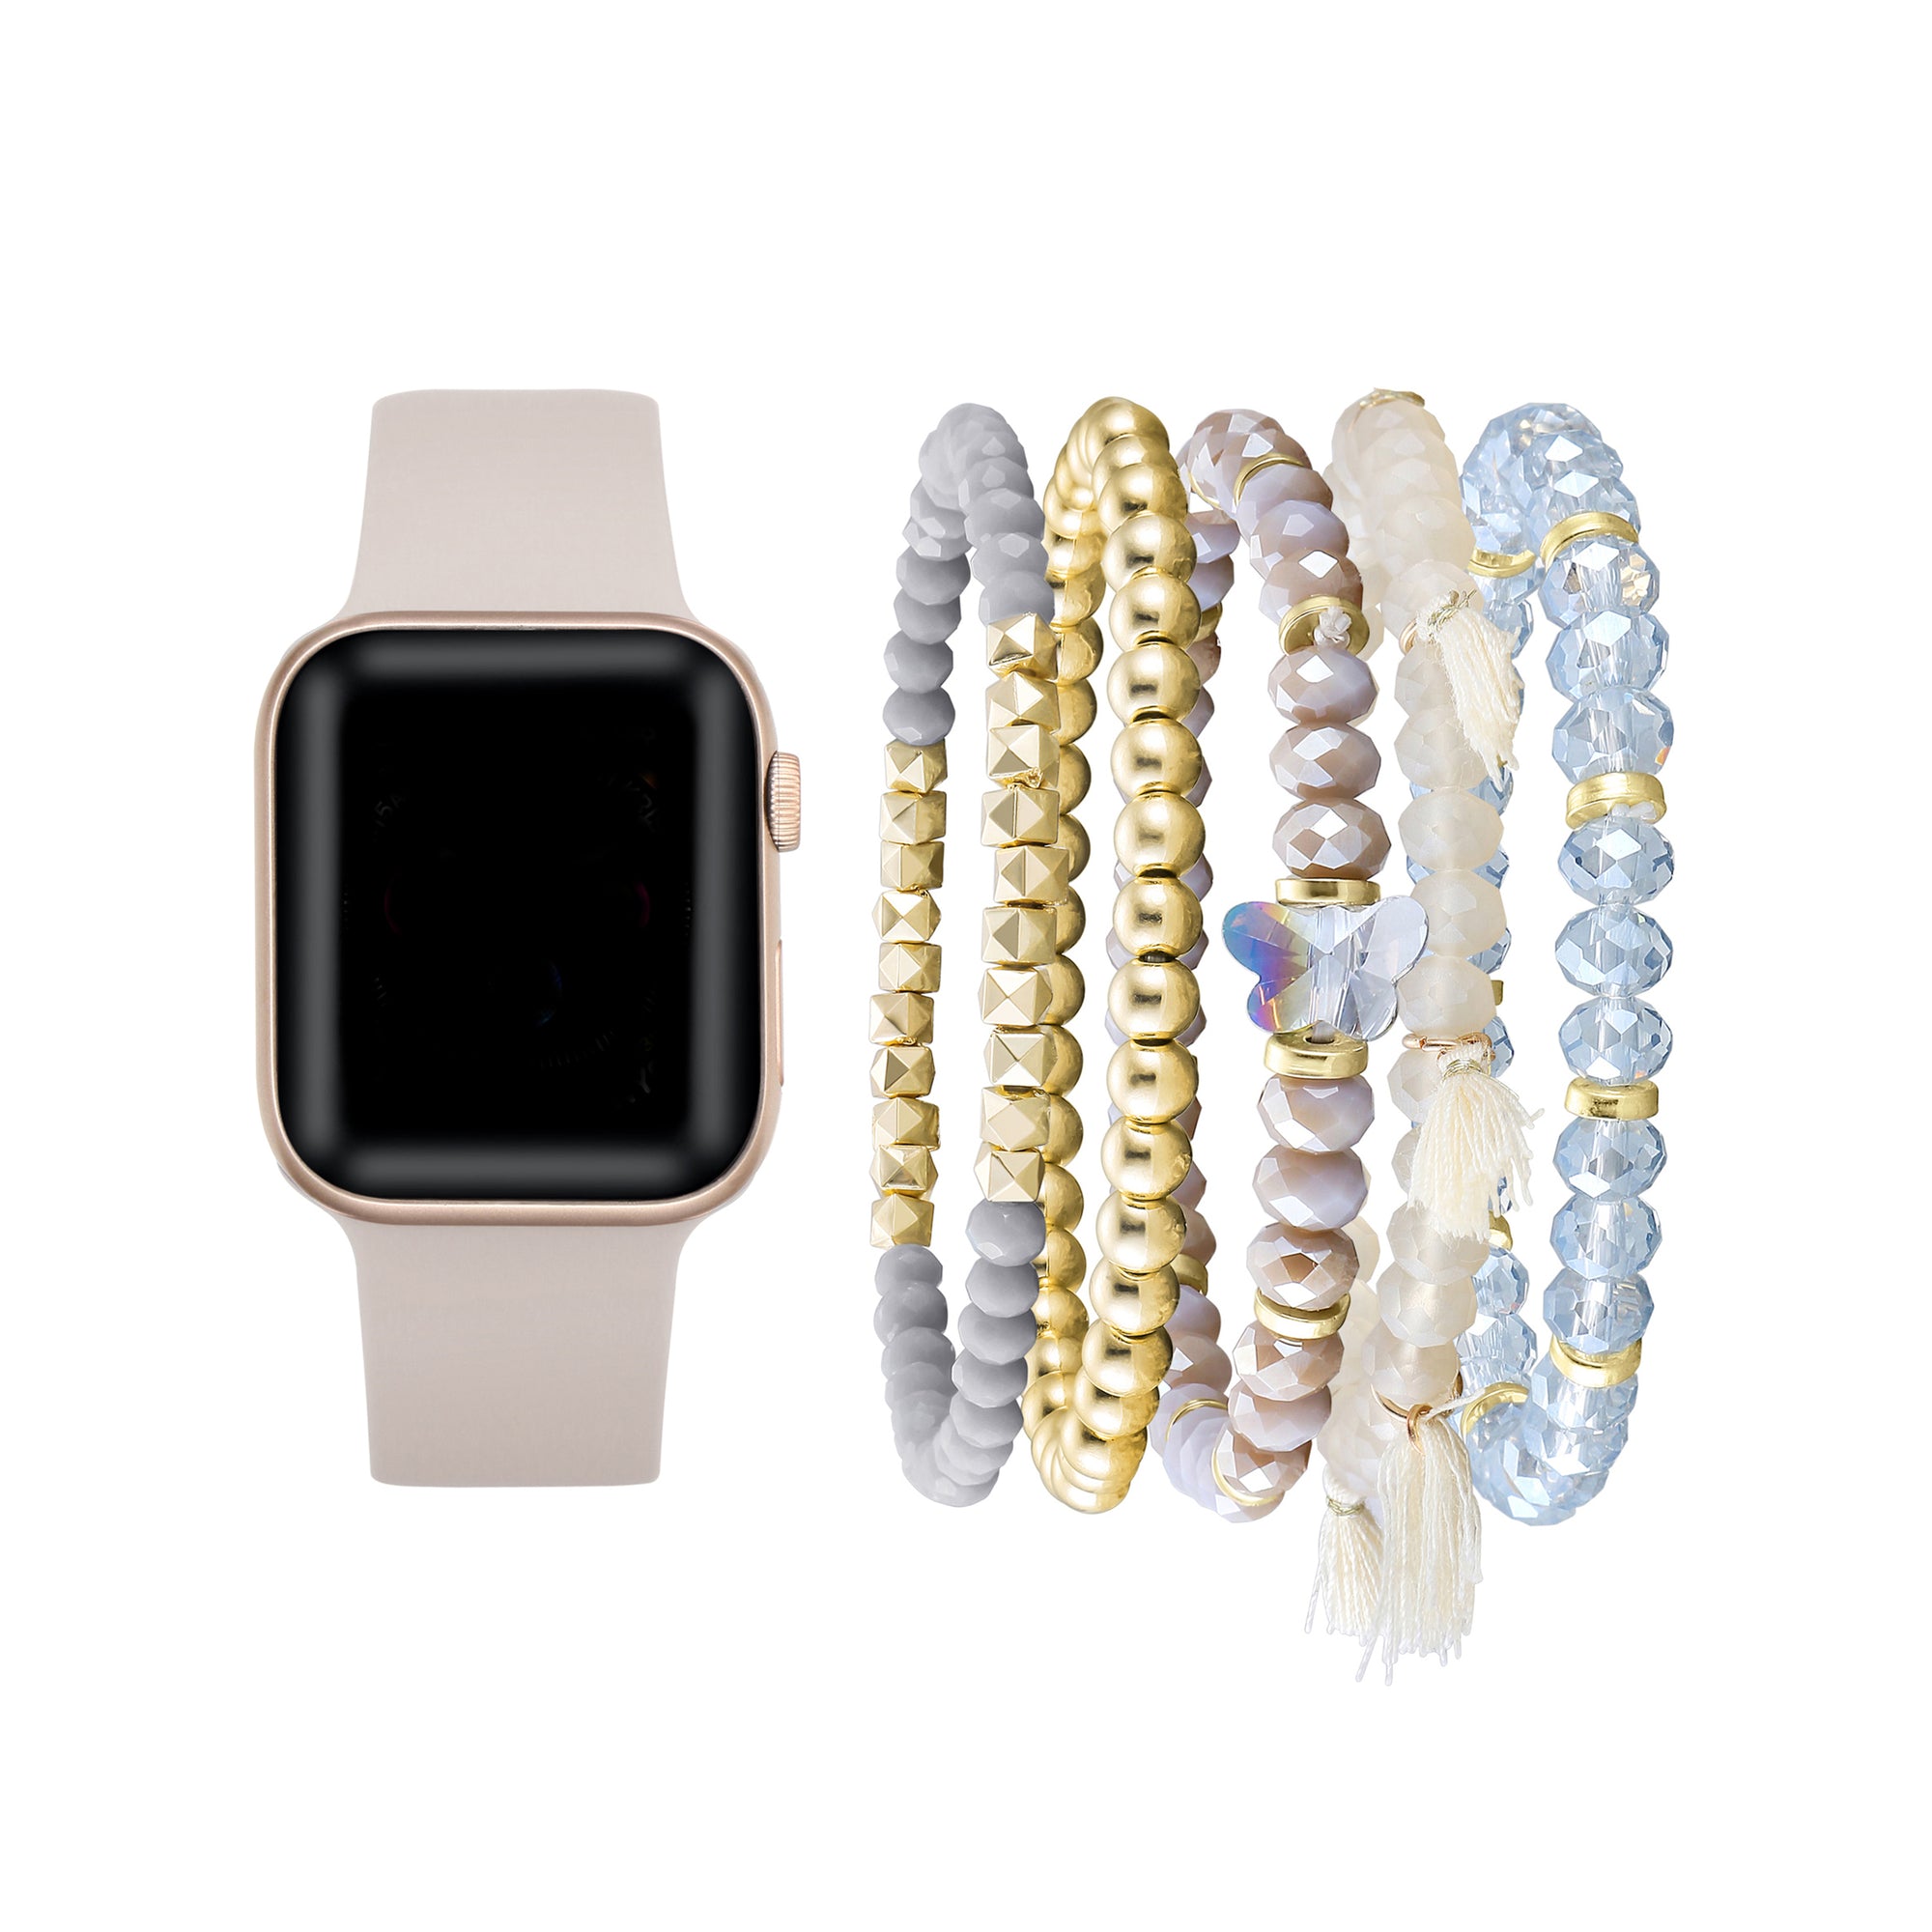 Silicone Band For Apple Watch  and Bracelet Bundle